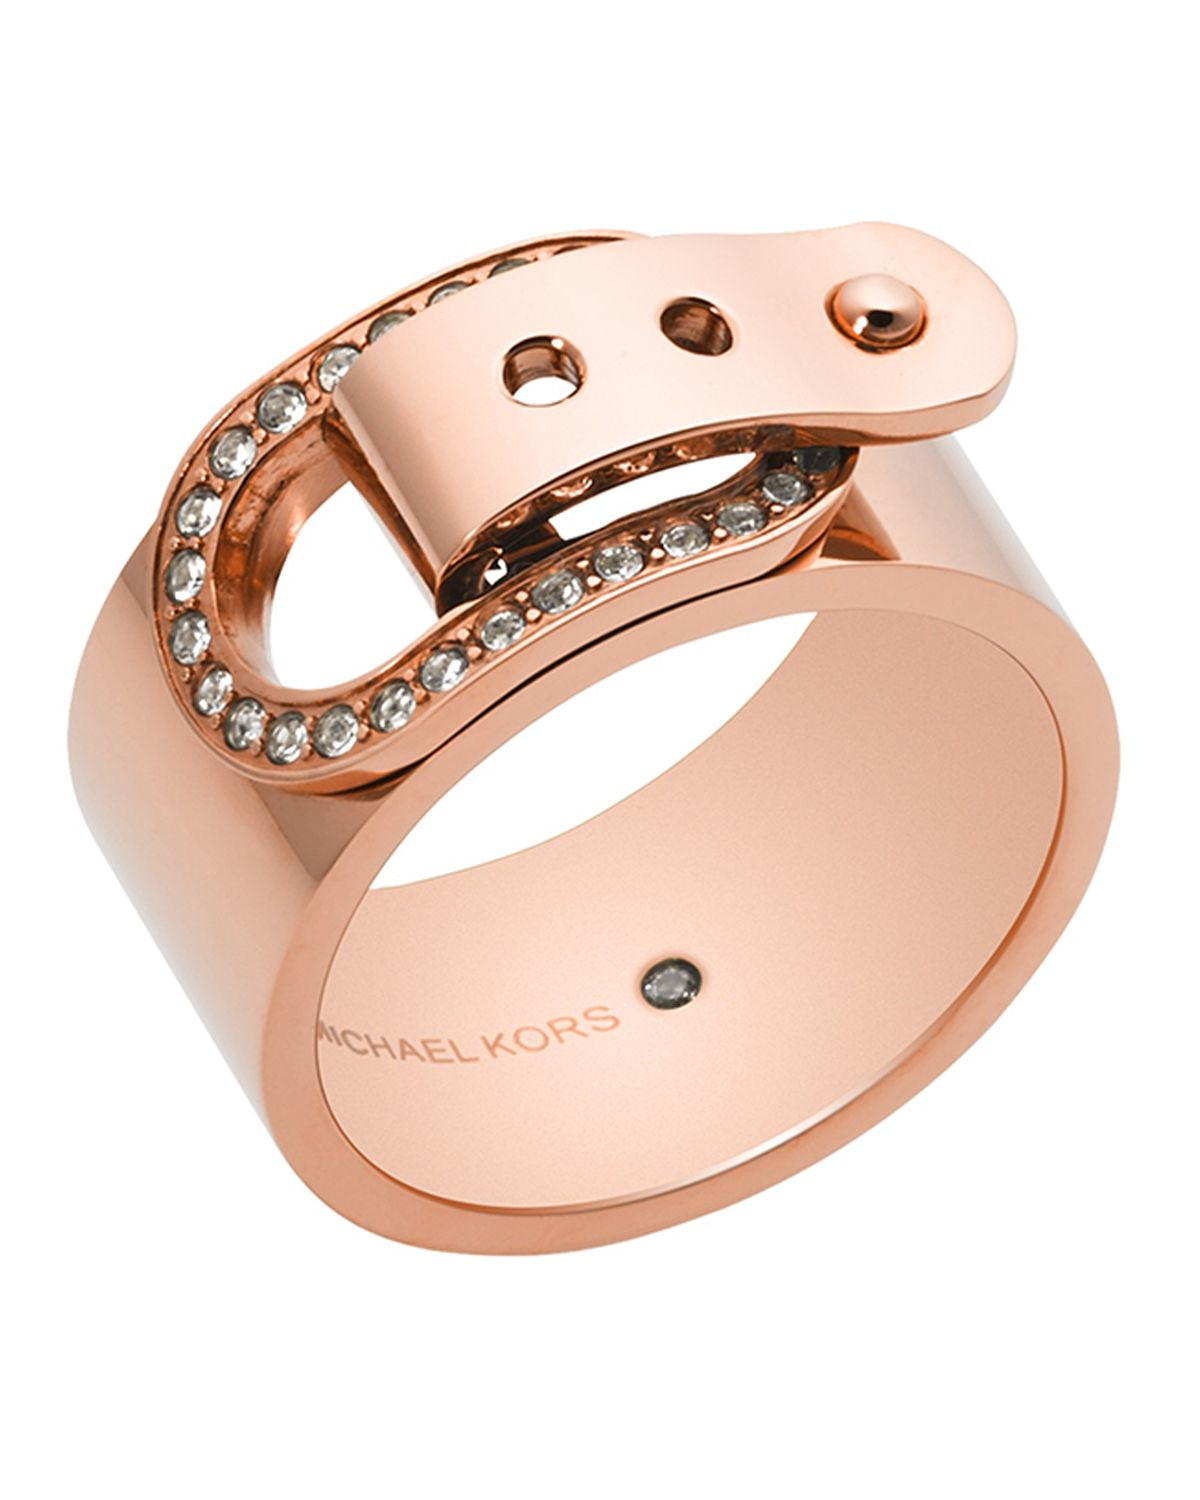 Michael kors Pavé Buckle Ring in Gold (Rose Gold) Lyst